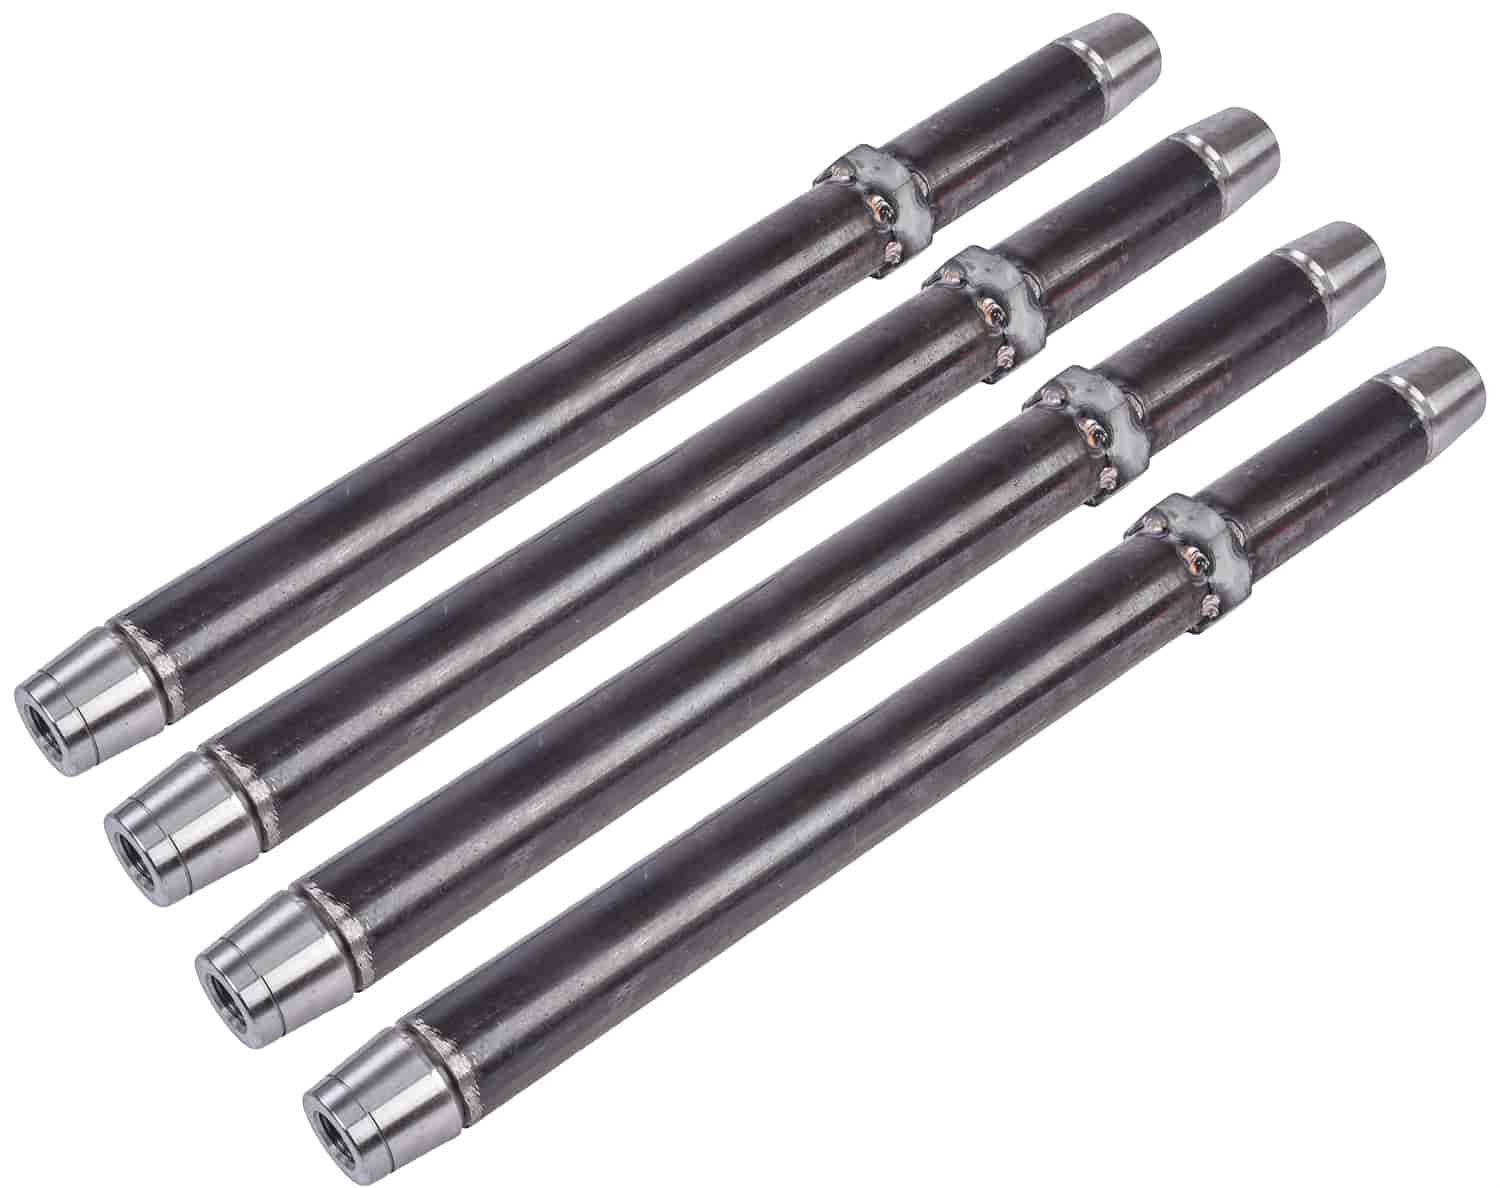 4-Link Tubing Kit [1 1/4 in. Diameter x 14 in. Length x 0.095 in. Thickness]